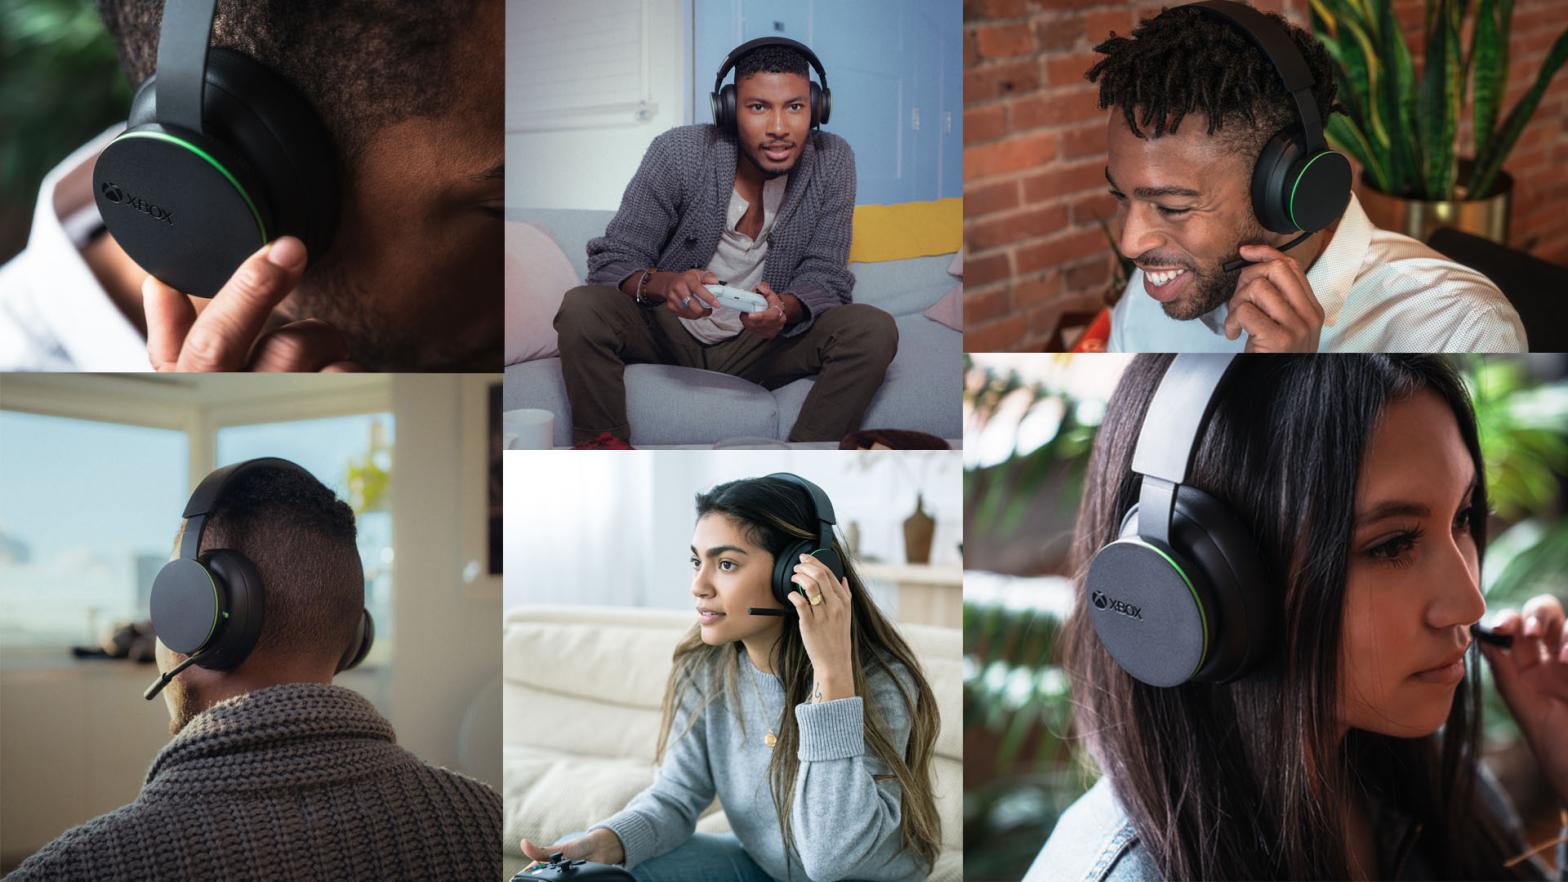 Will the new Xbox Wireless Headset make your home look cleaner and make you more attractive? Sure, why not? (Photo: Microsoft)